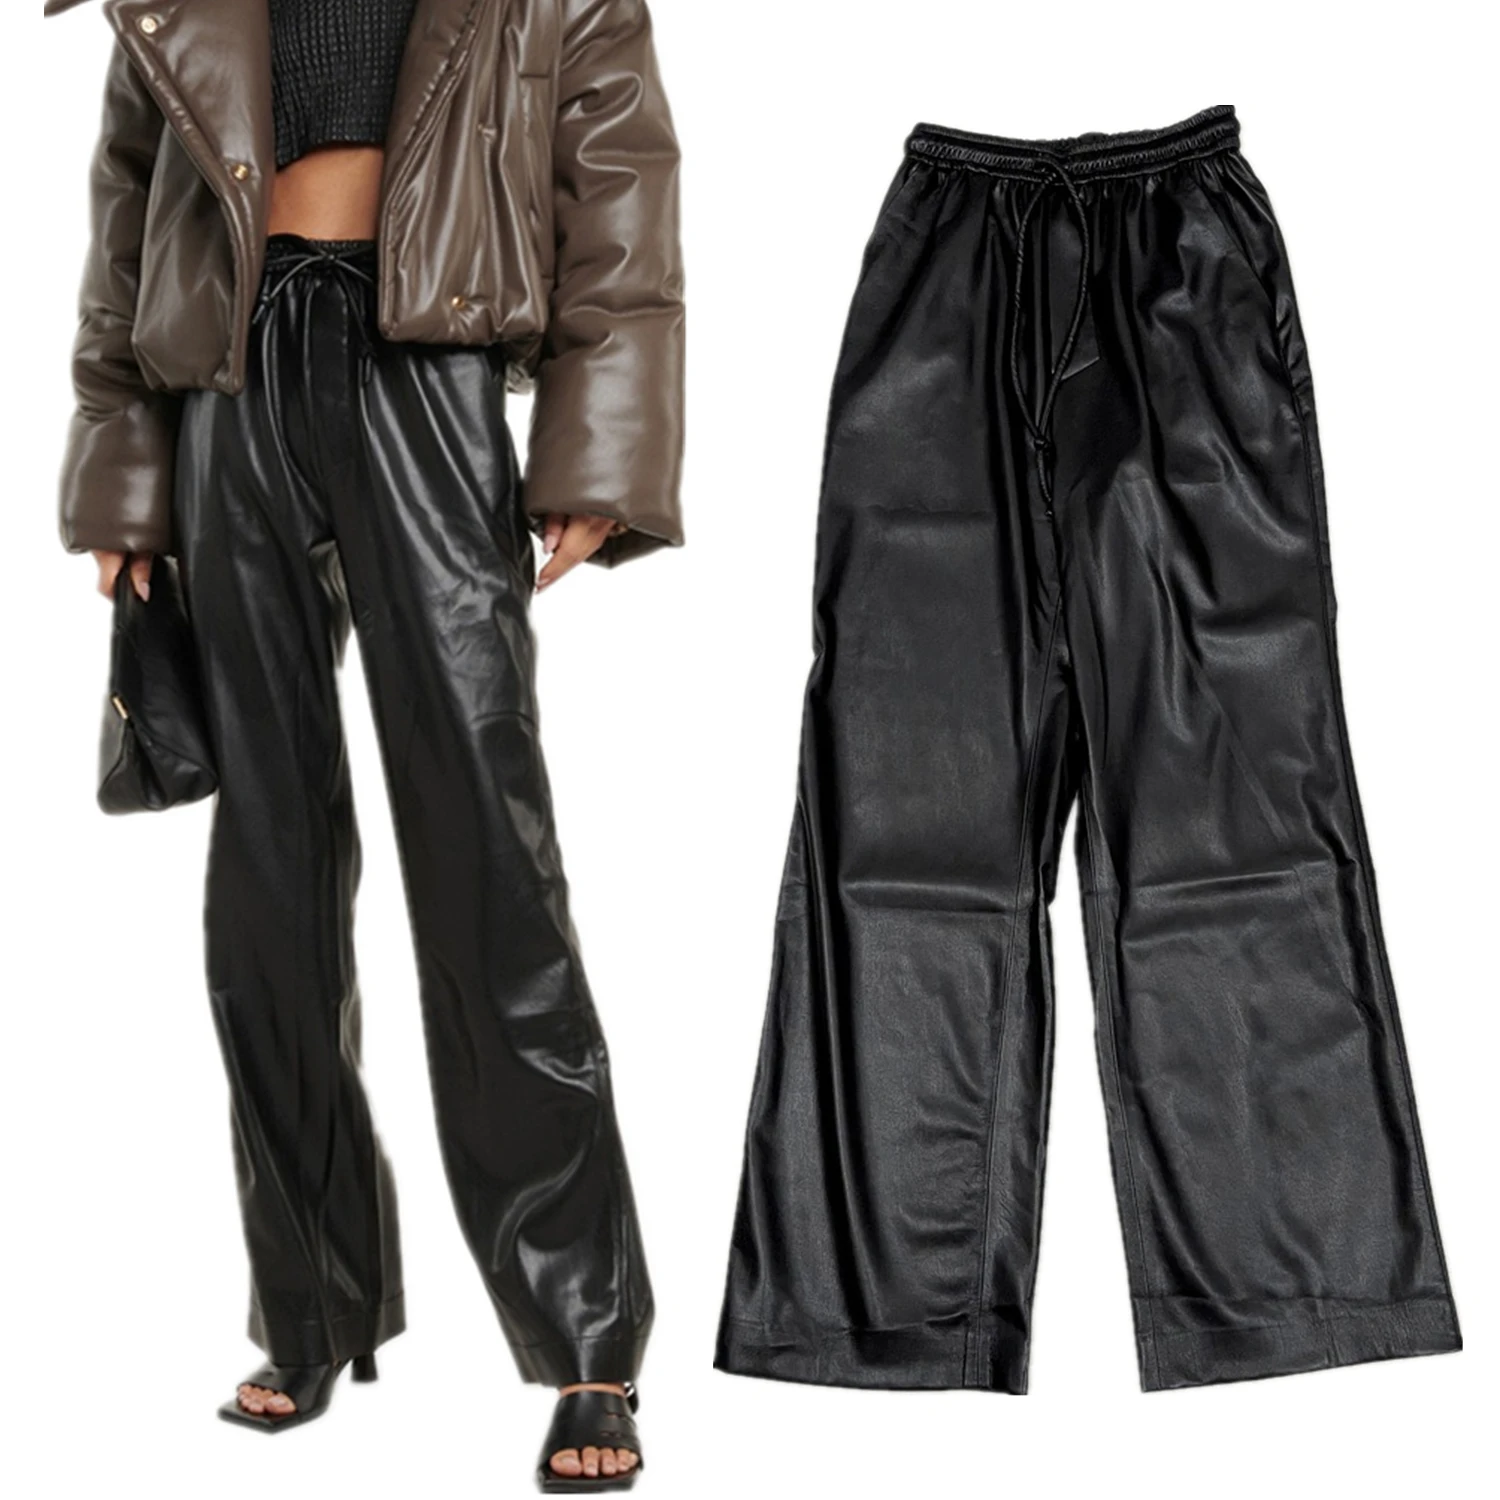 Withered Environmental Protection Leather Casual Pants High Street Fashion Retro Drawstring Loose Harem Leather Pants Women 50sheets a4 a5 b5 blank horizontal line paper retro thicken kraft paper eye protection chinese envelope paper vintage stationery